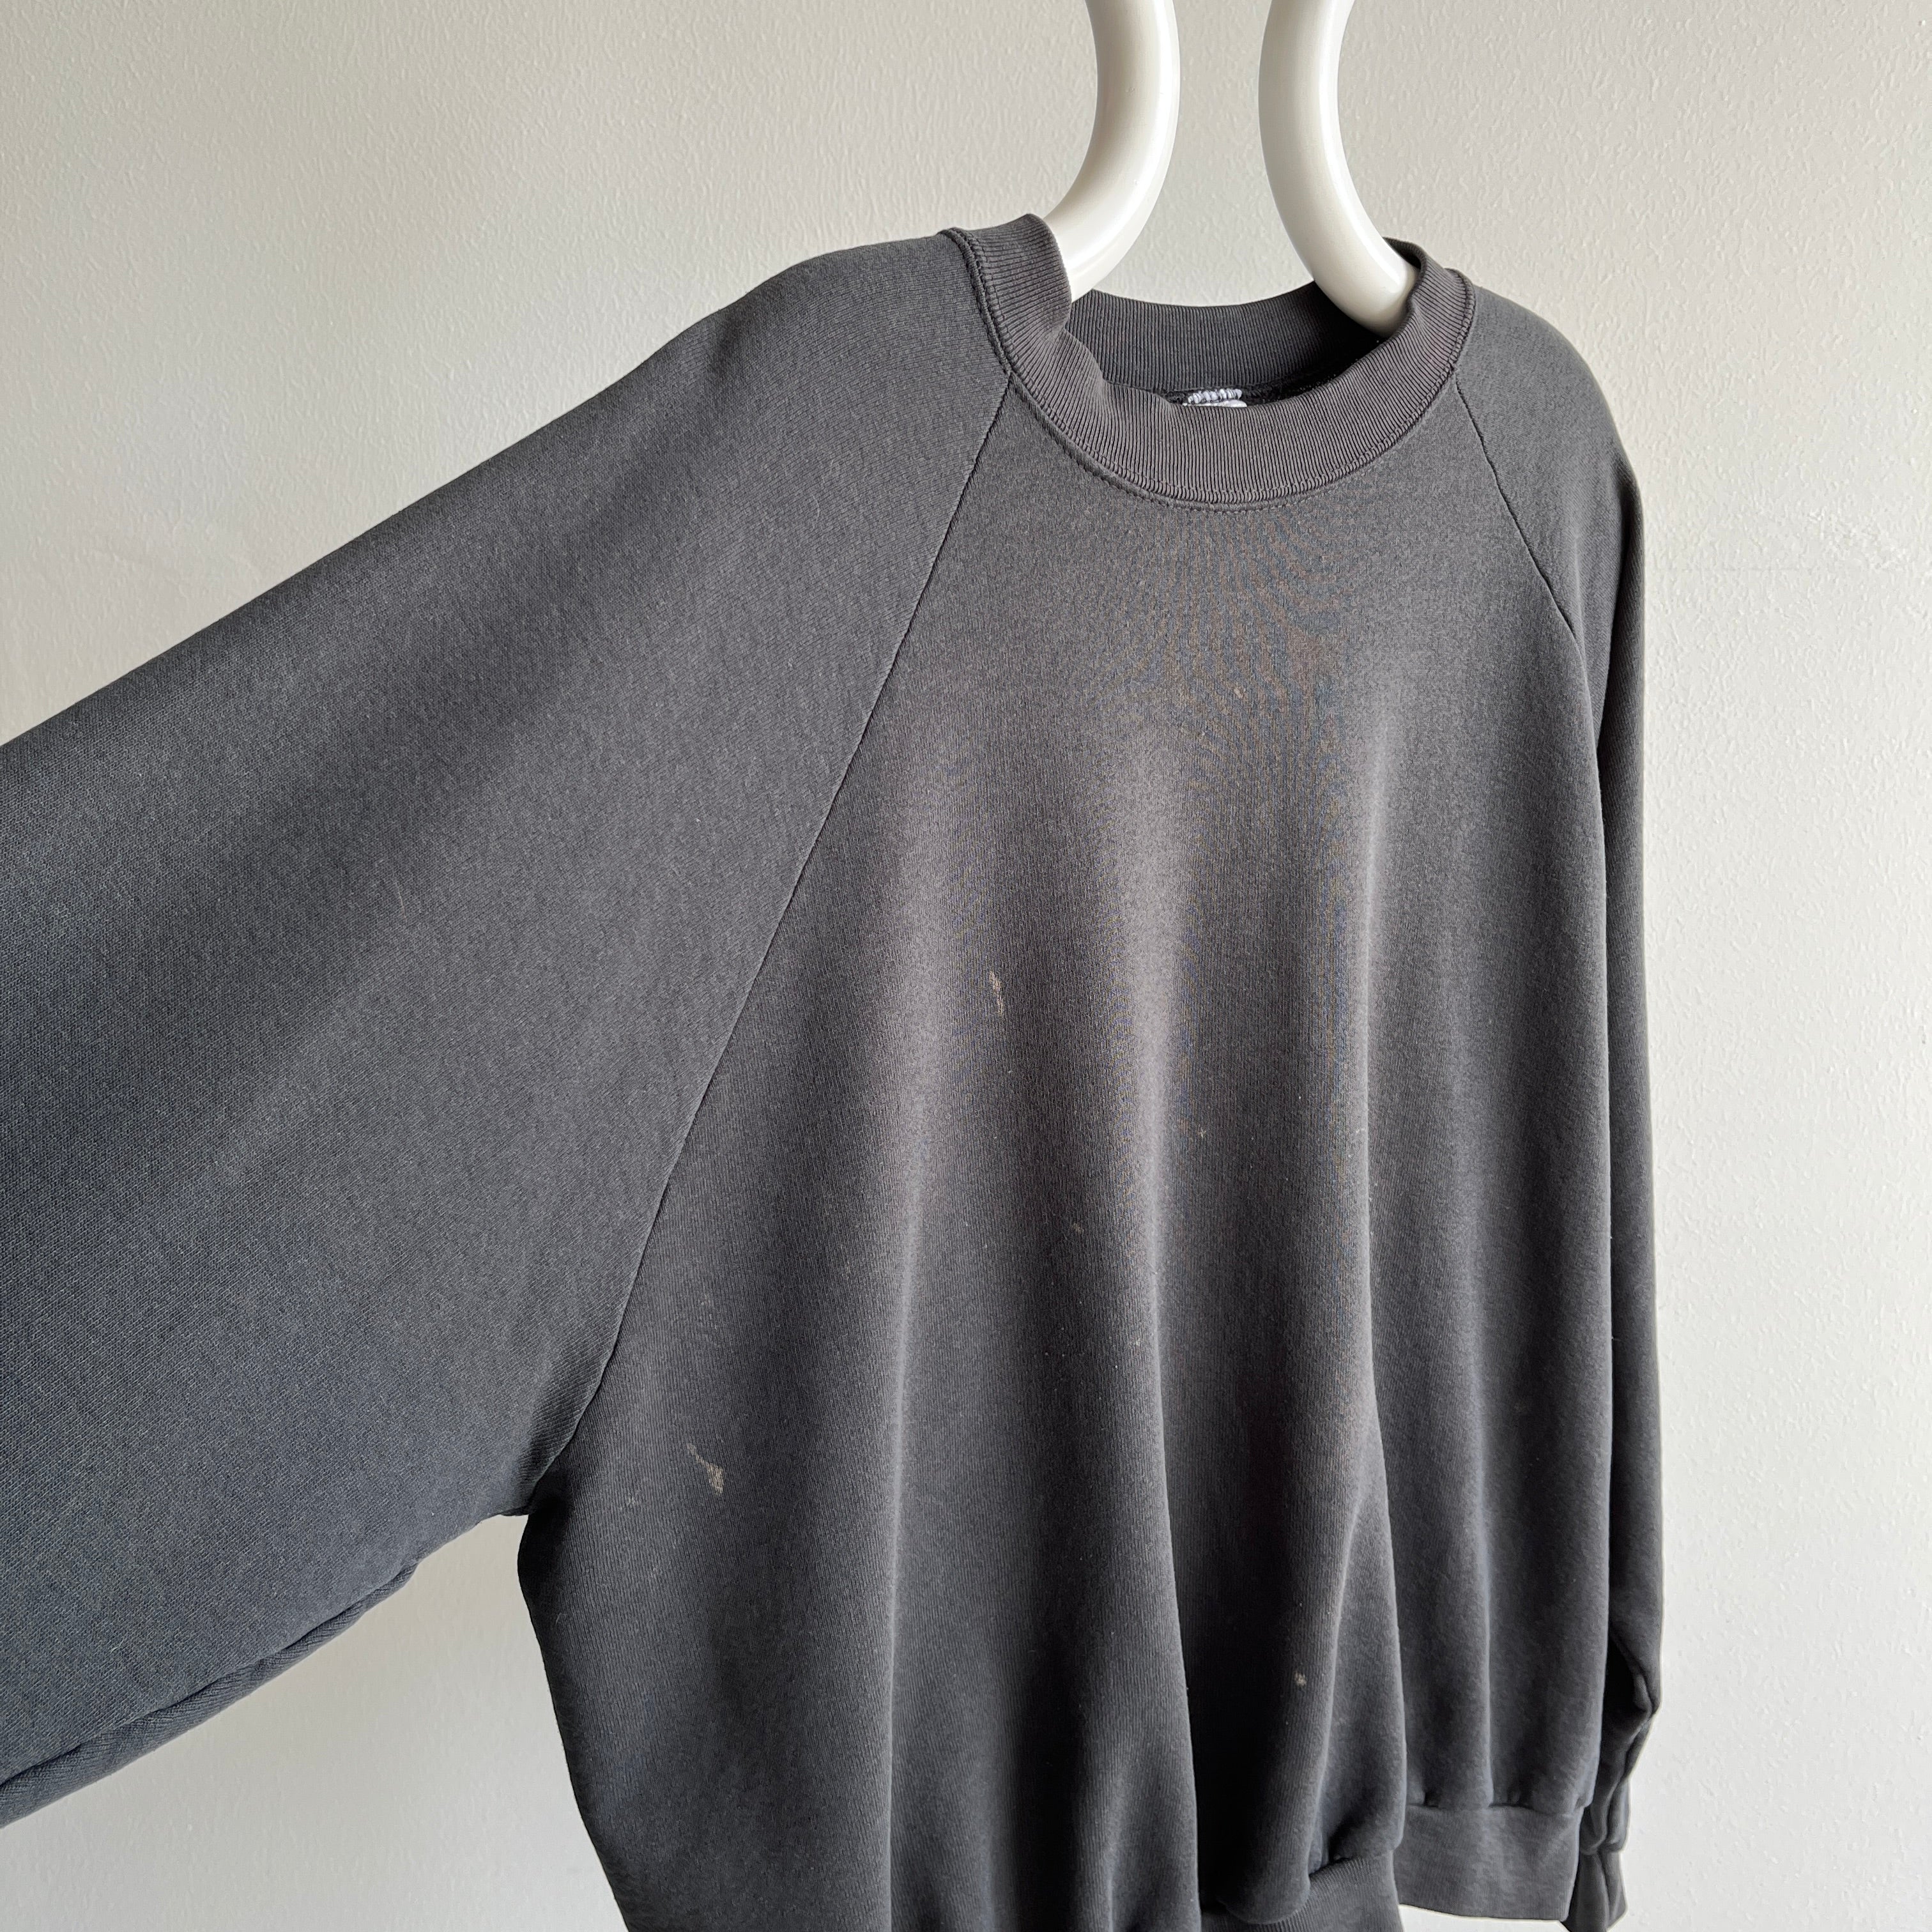 1980s FOTL Paint Stained and Thinned Out Blank Black Sweatshirt - Staff favorite